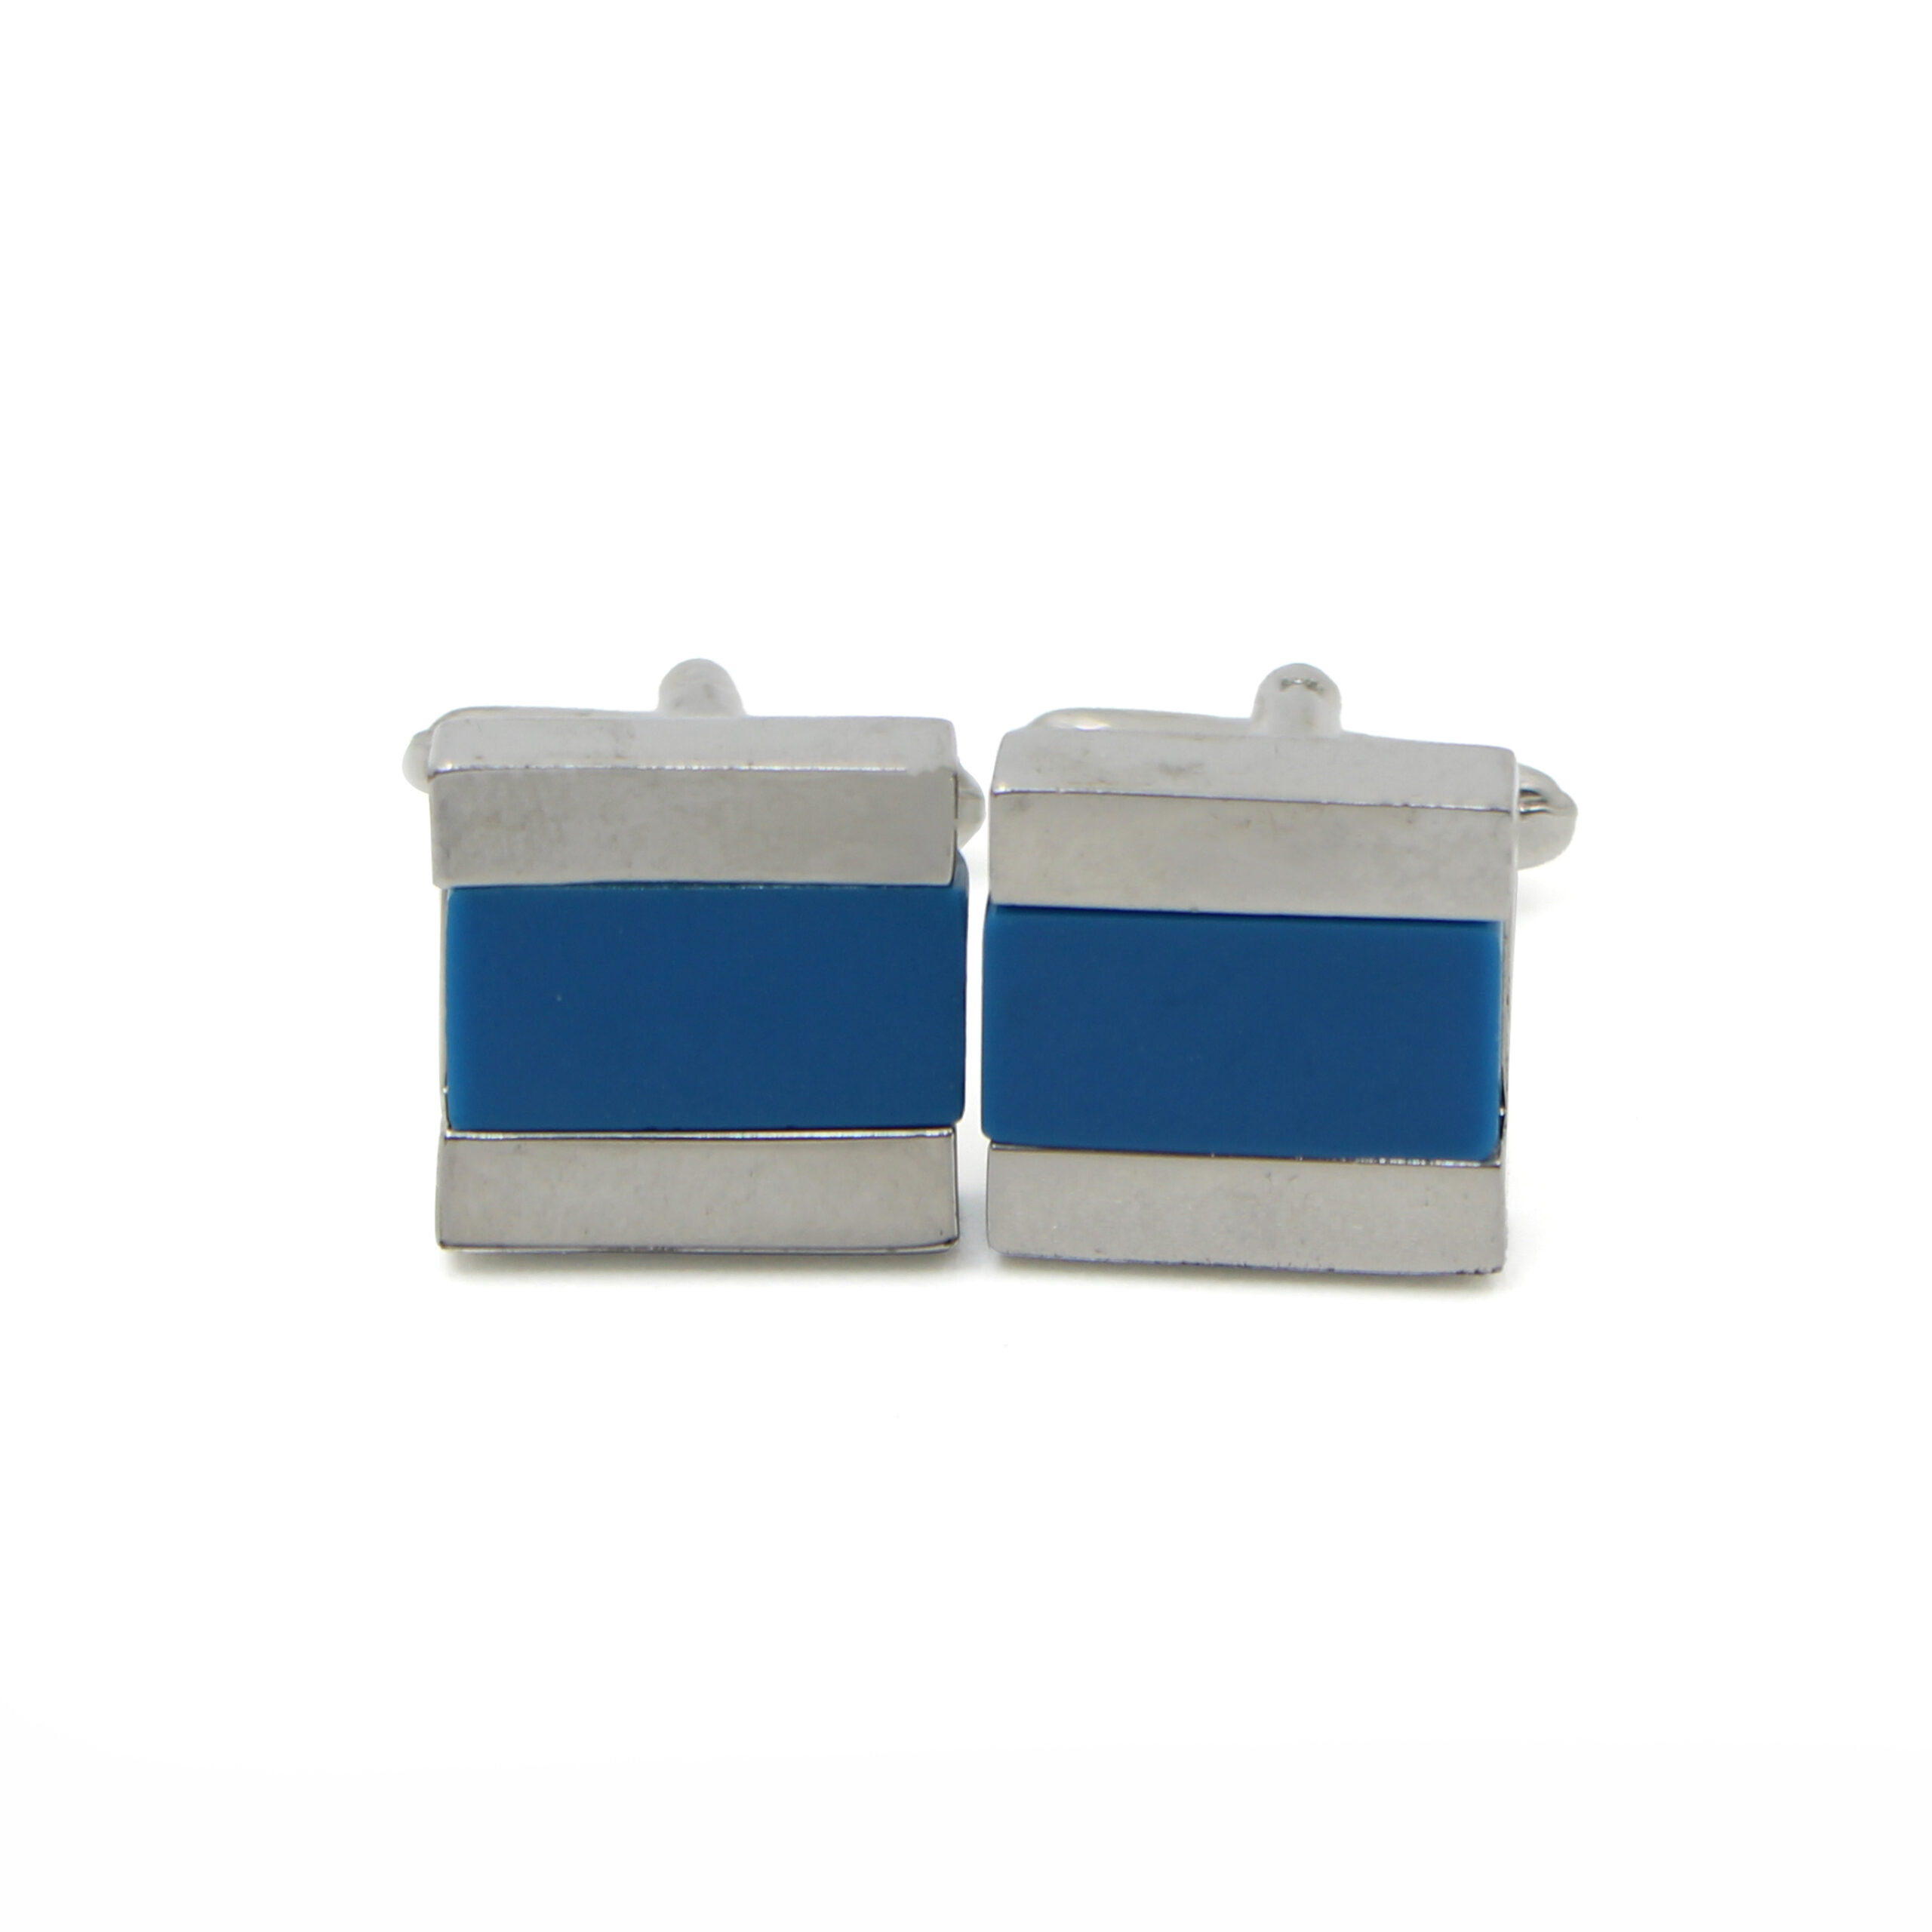 Cufflers Vintage Cufflinks for Men’s Shirt with a Gift Box – CU-1023 – Blue